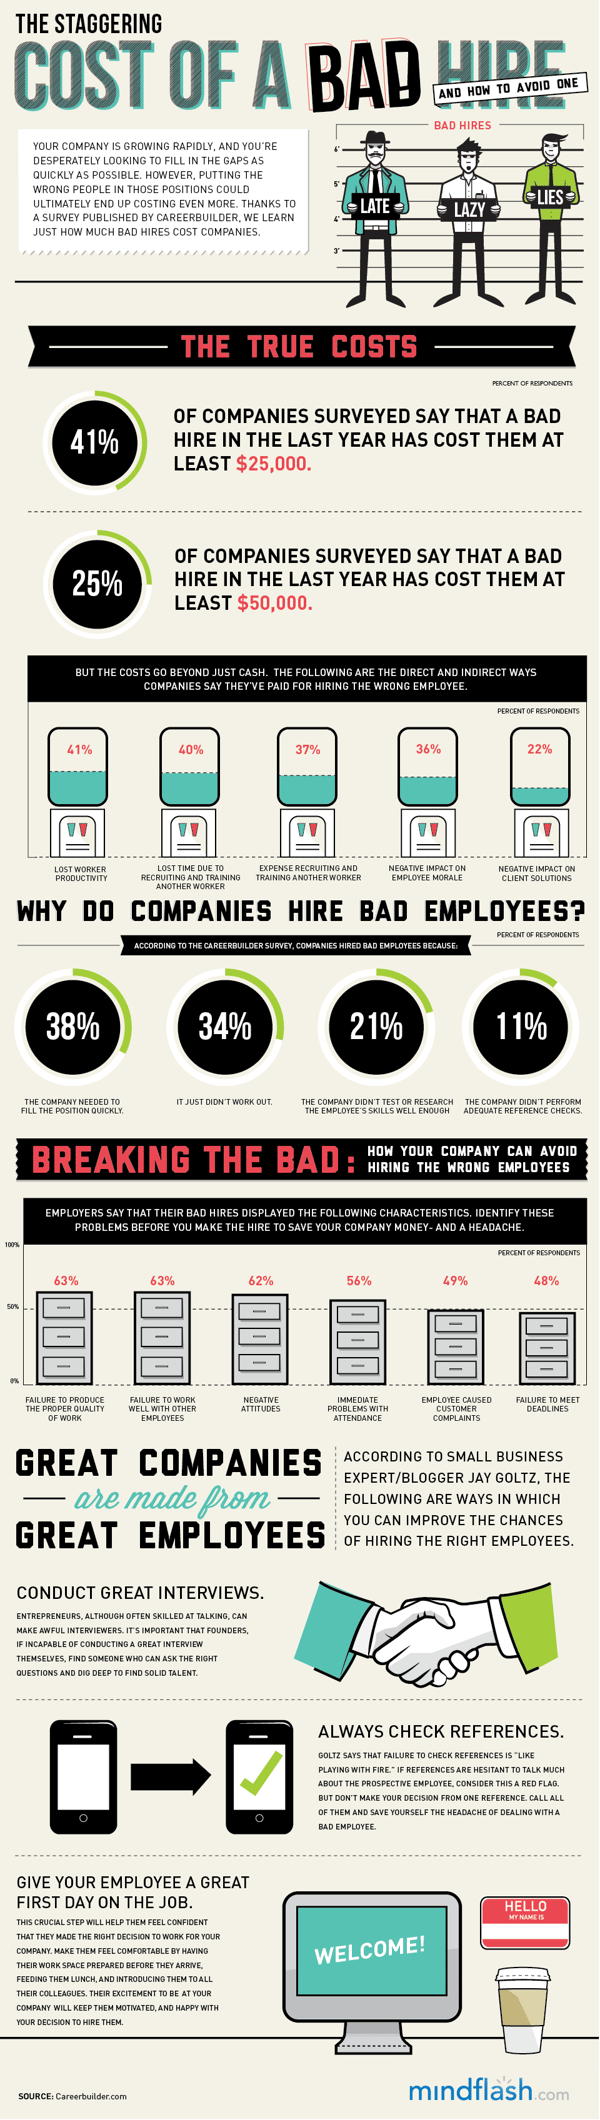 Infographic showing the cost of a bad hire